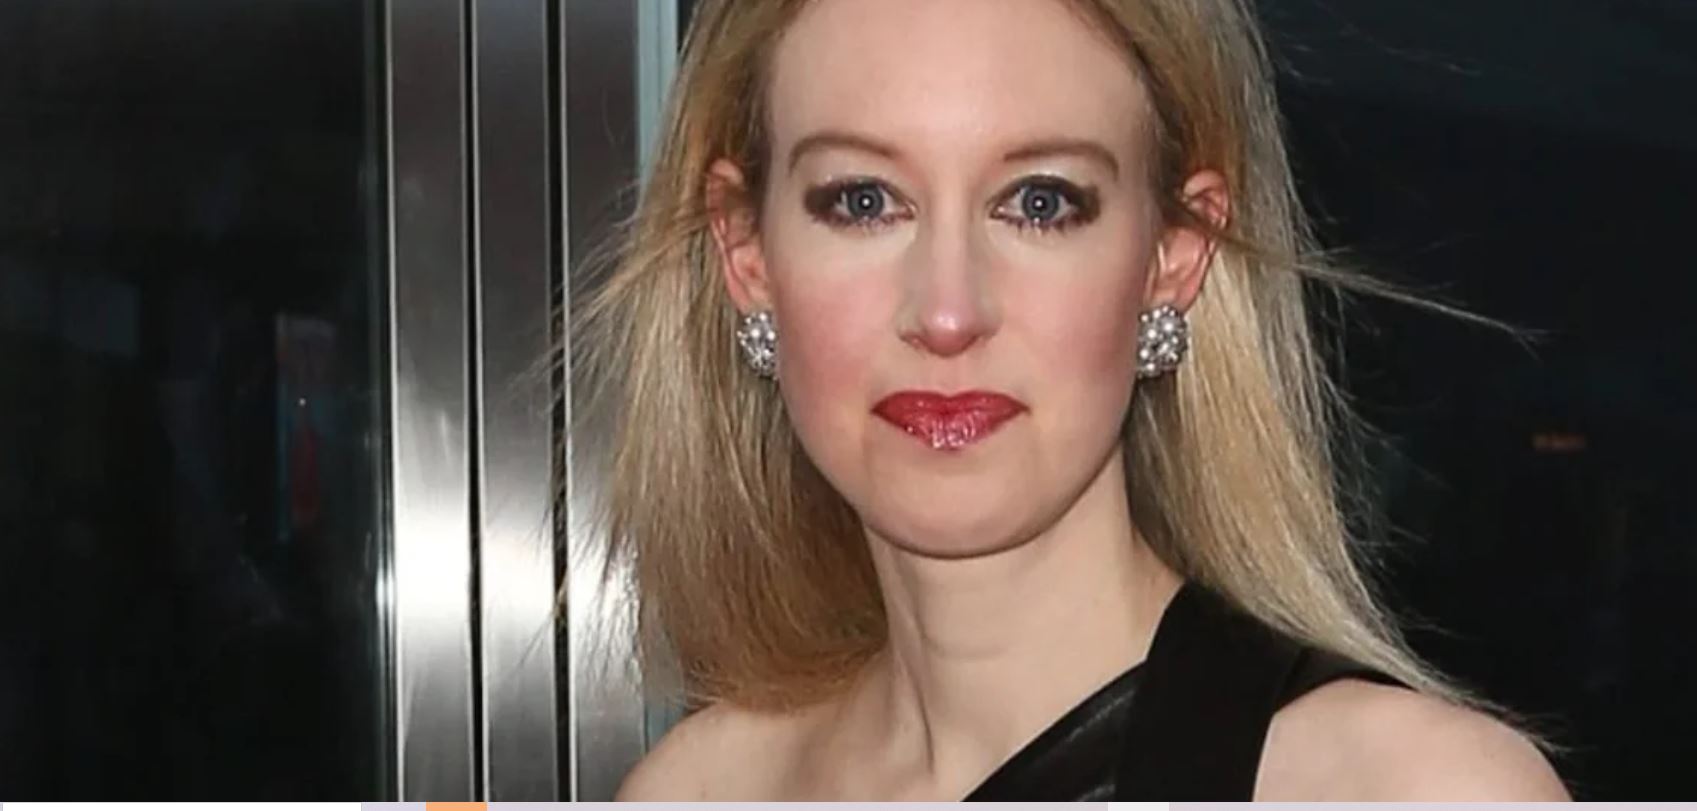 Has Theranos Founder Elizabeth Holmes Lost Final Battle to Avoid Prison? Judge Orders Restitution to Investors